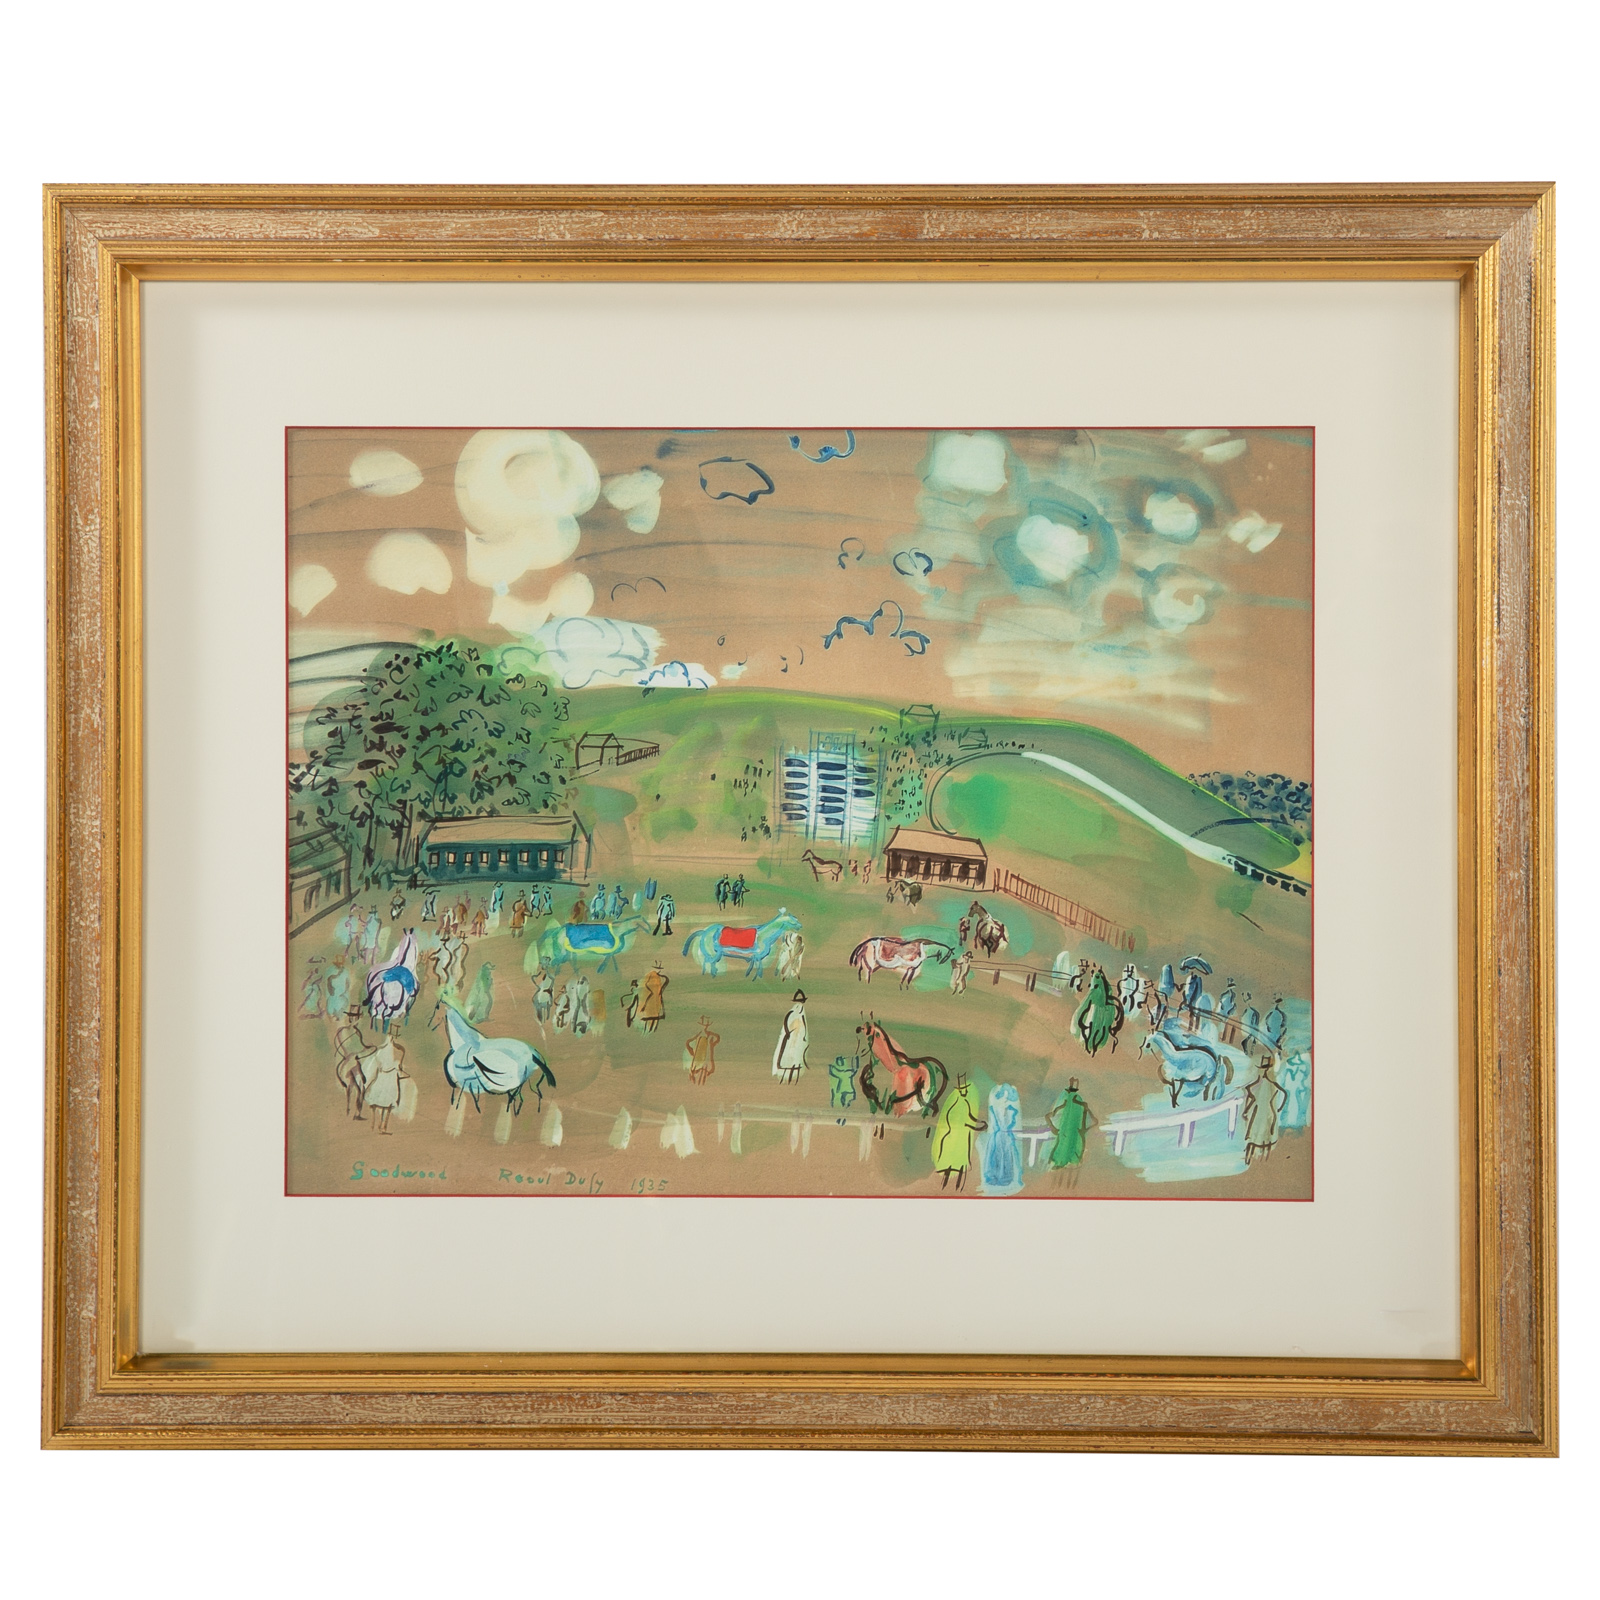 AFTER RAOUL DUFY. "GOODWOOD," LITHOGRAPH